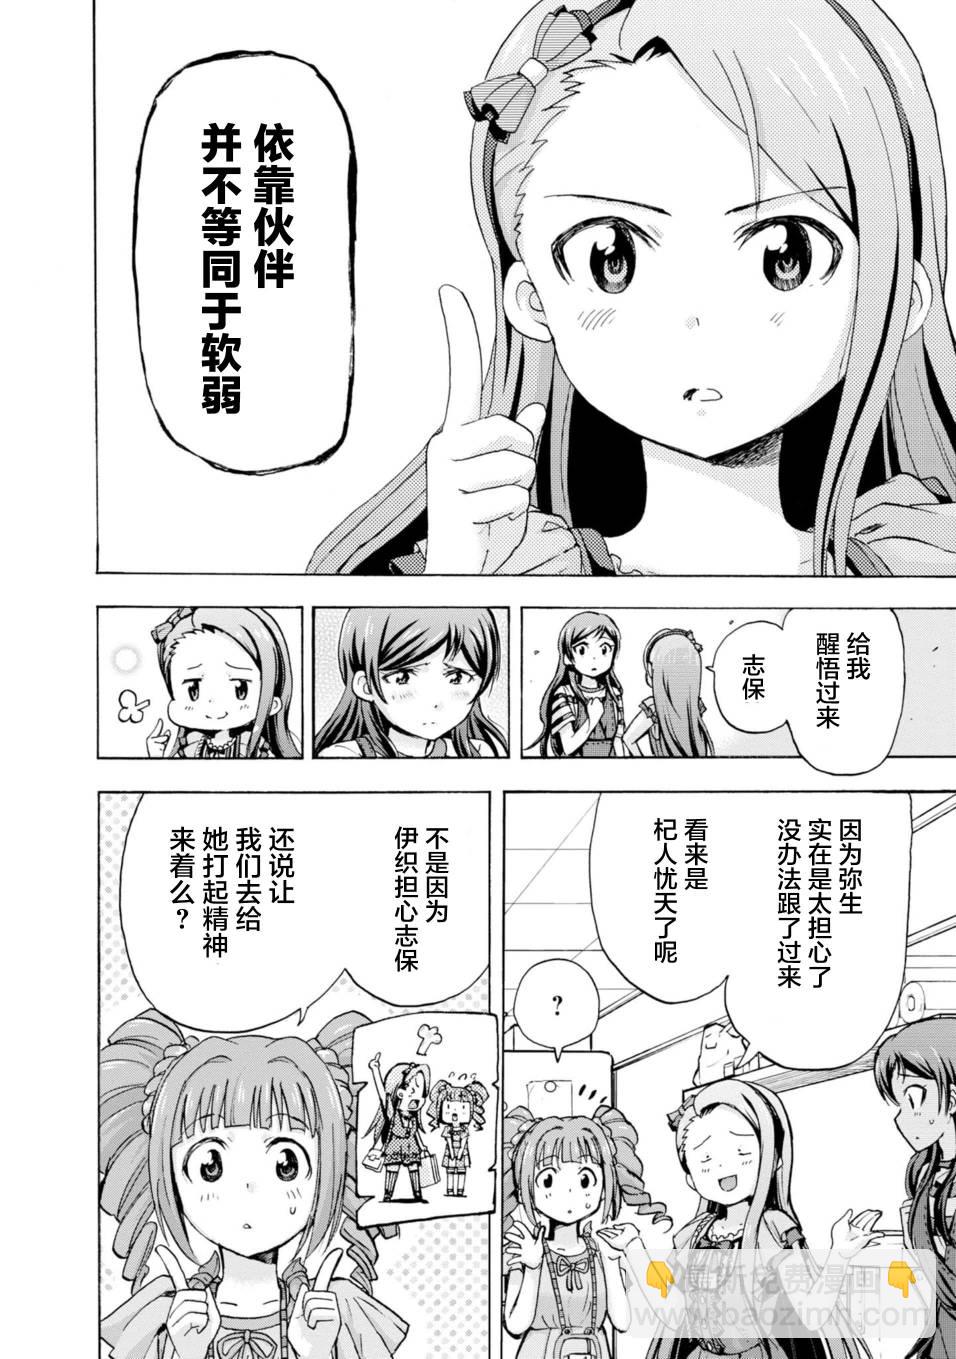 THE IDOLM@STER MILLION LIVE! Blooming Clover - 14話 - 7